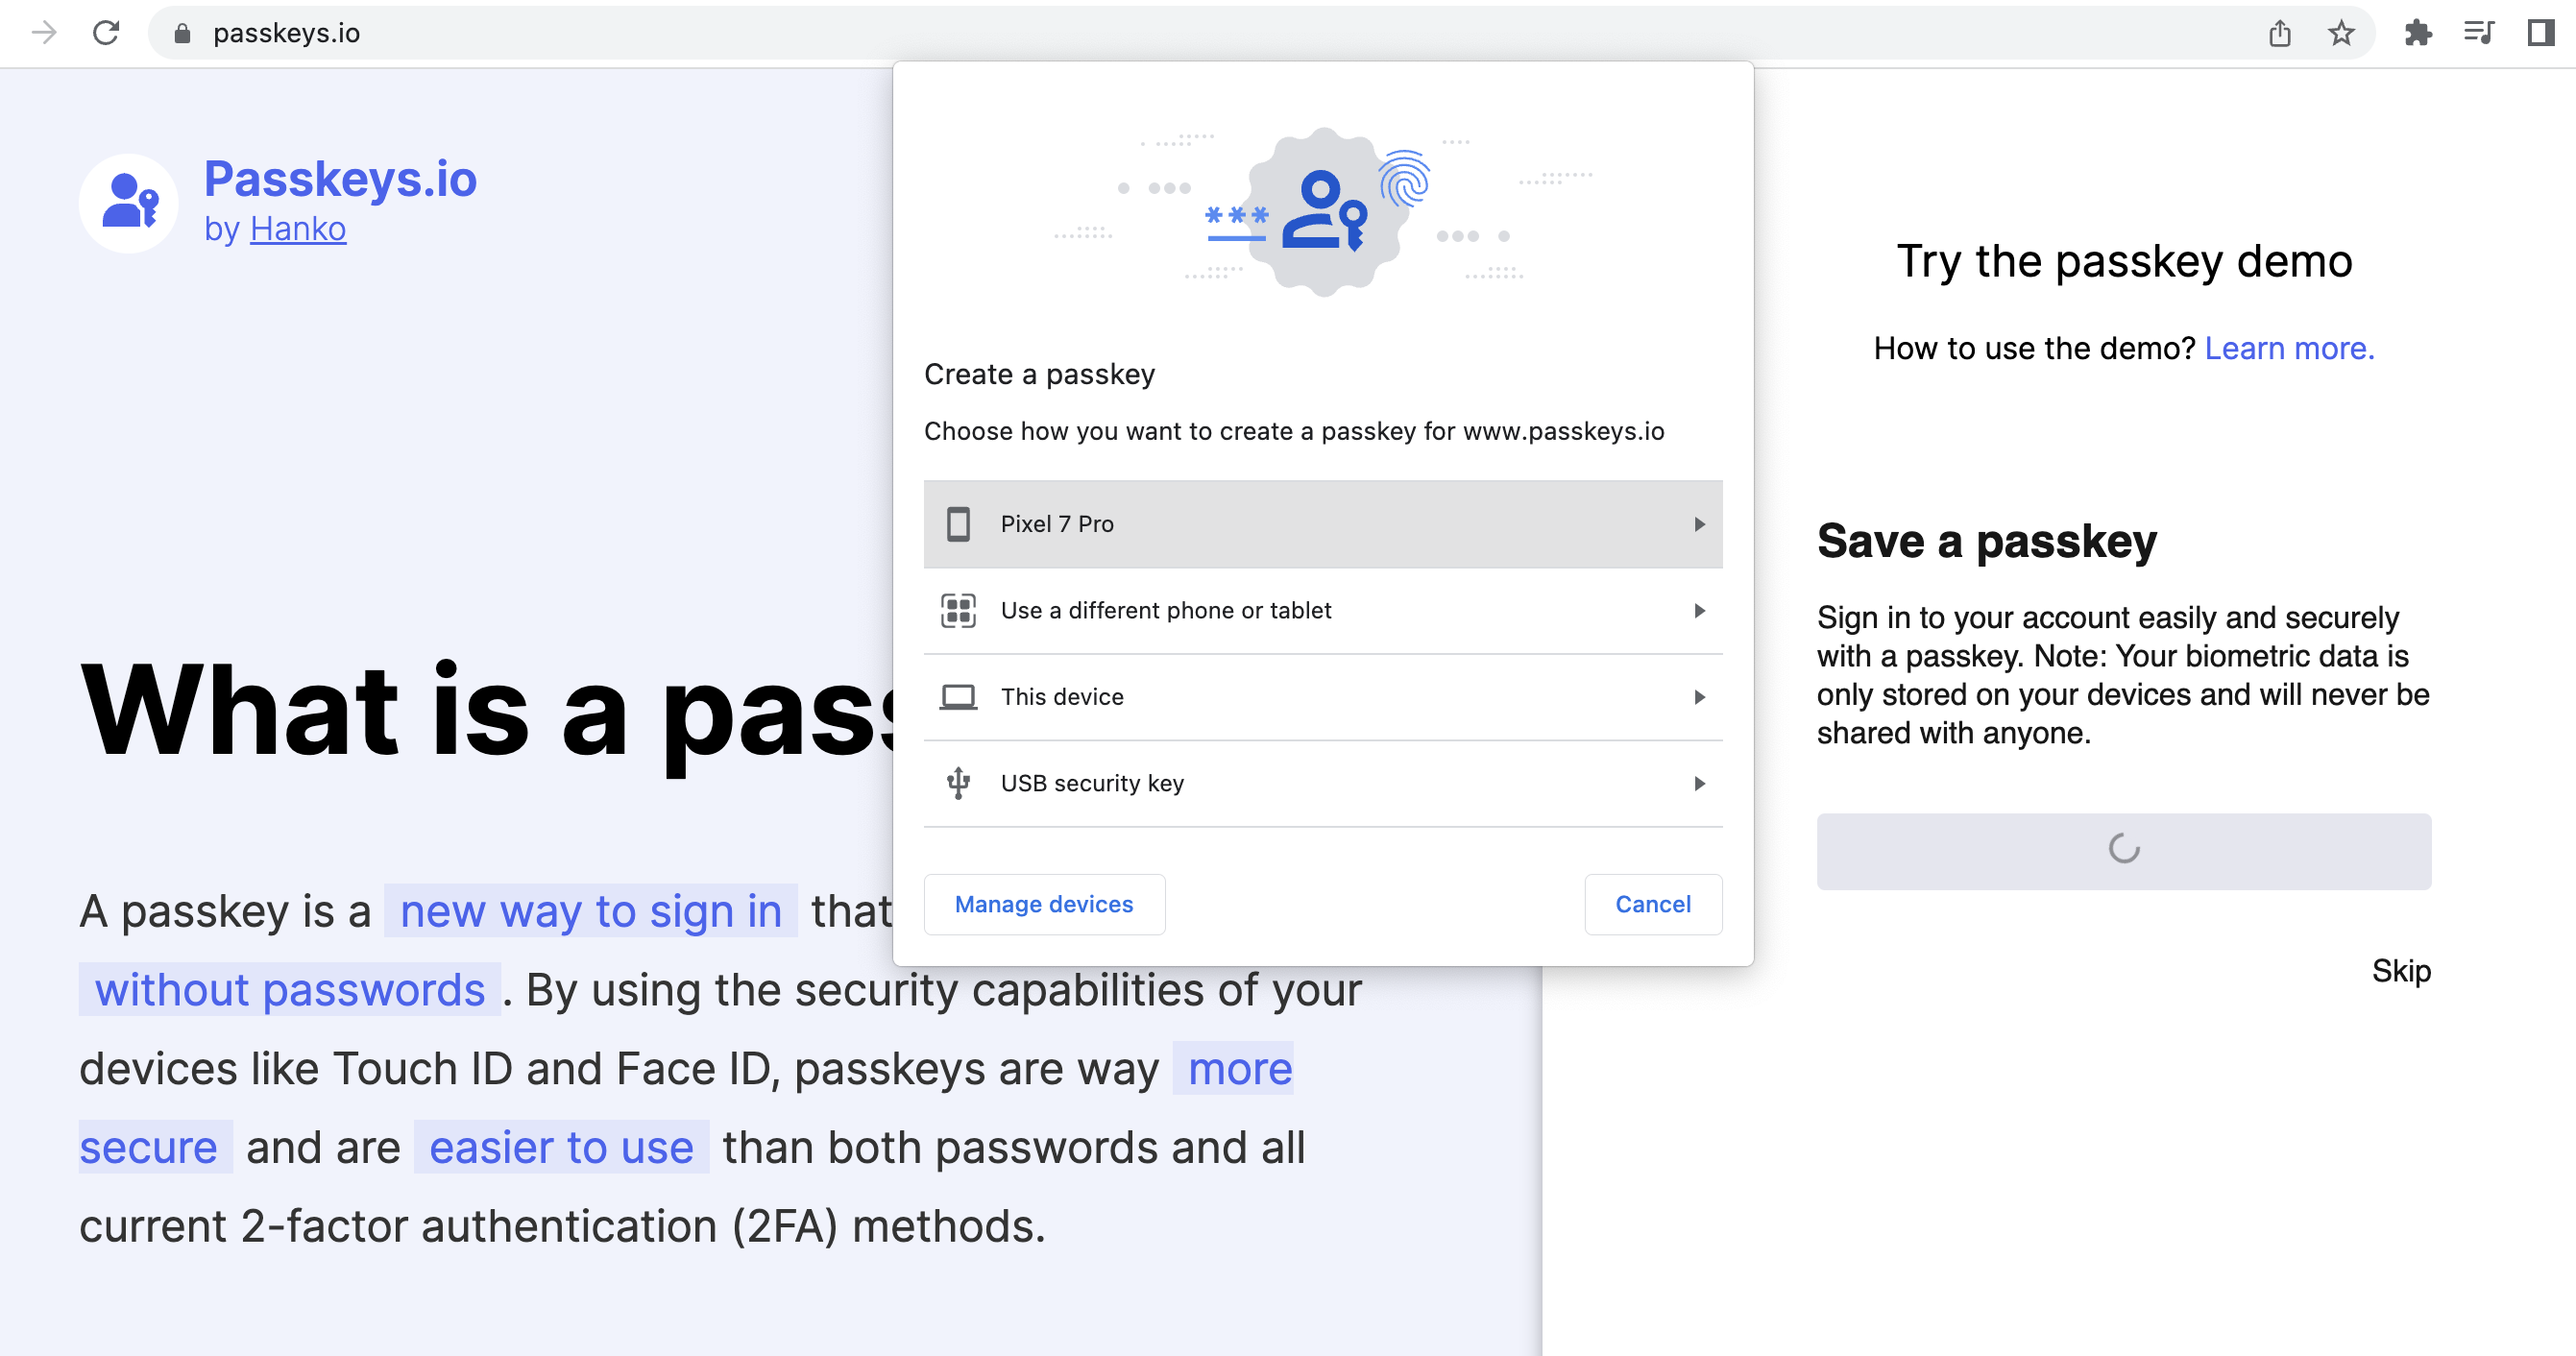 Sign up process - save a passkey